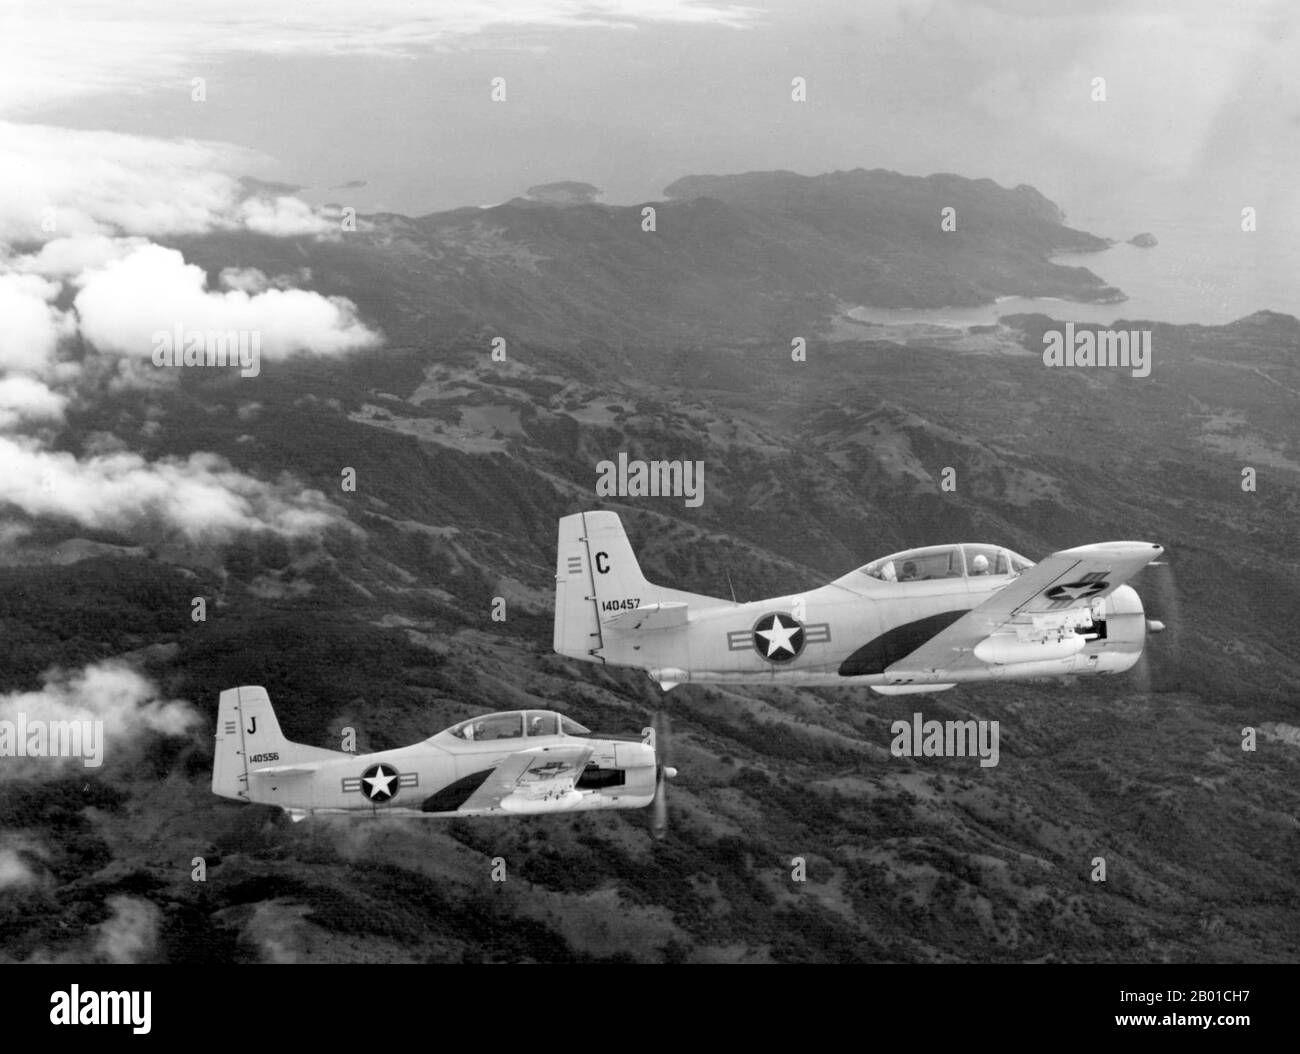 Vietnam: Two South Vietnamese Air Force North American T-28C Trojan aircraft flying over the Vietnamese coastline during a counterinsurgency training mission, 1962.  The Second Indochina War, known in America as the Vietnam War, was a Cold War era military conflict that occurred in Vietnam, Laos, and Cambodia from 1 November 1955 to the fall of Saigon on 30 April 1975. This war followed the First Indochina War and was fought between North Vietnam, supported by its communist allies, and the government of South Vietnam, supported by the U.S. and other anti-communist nations. Stock Photo